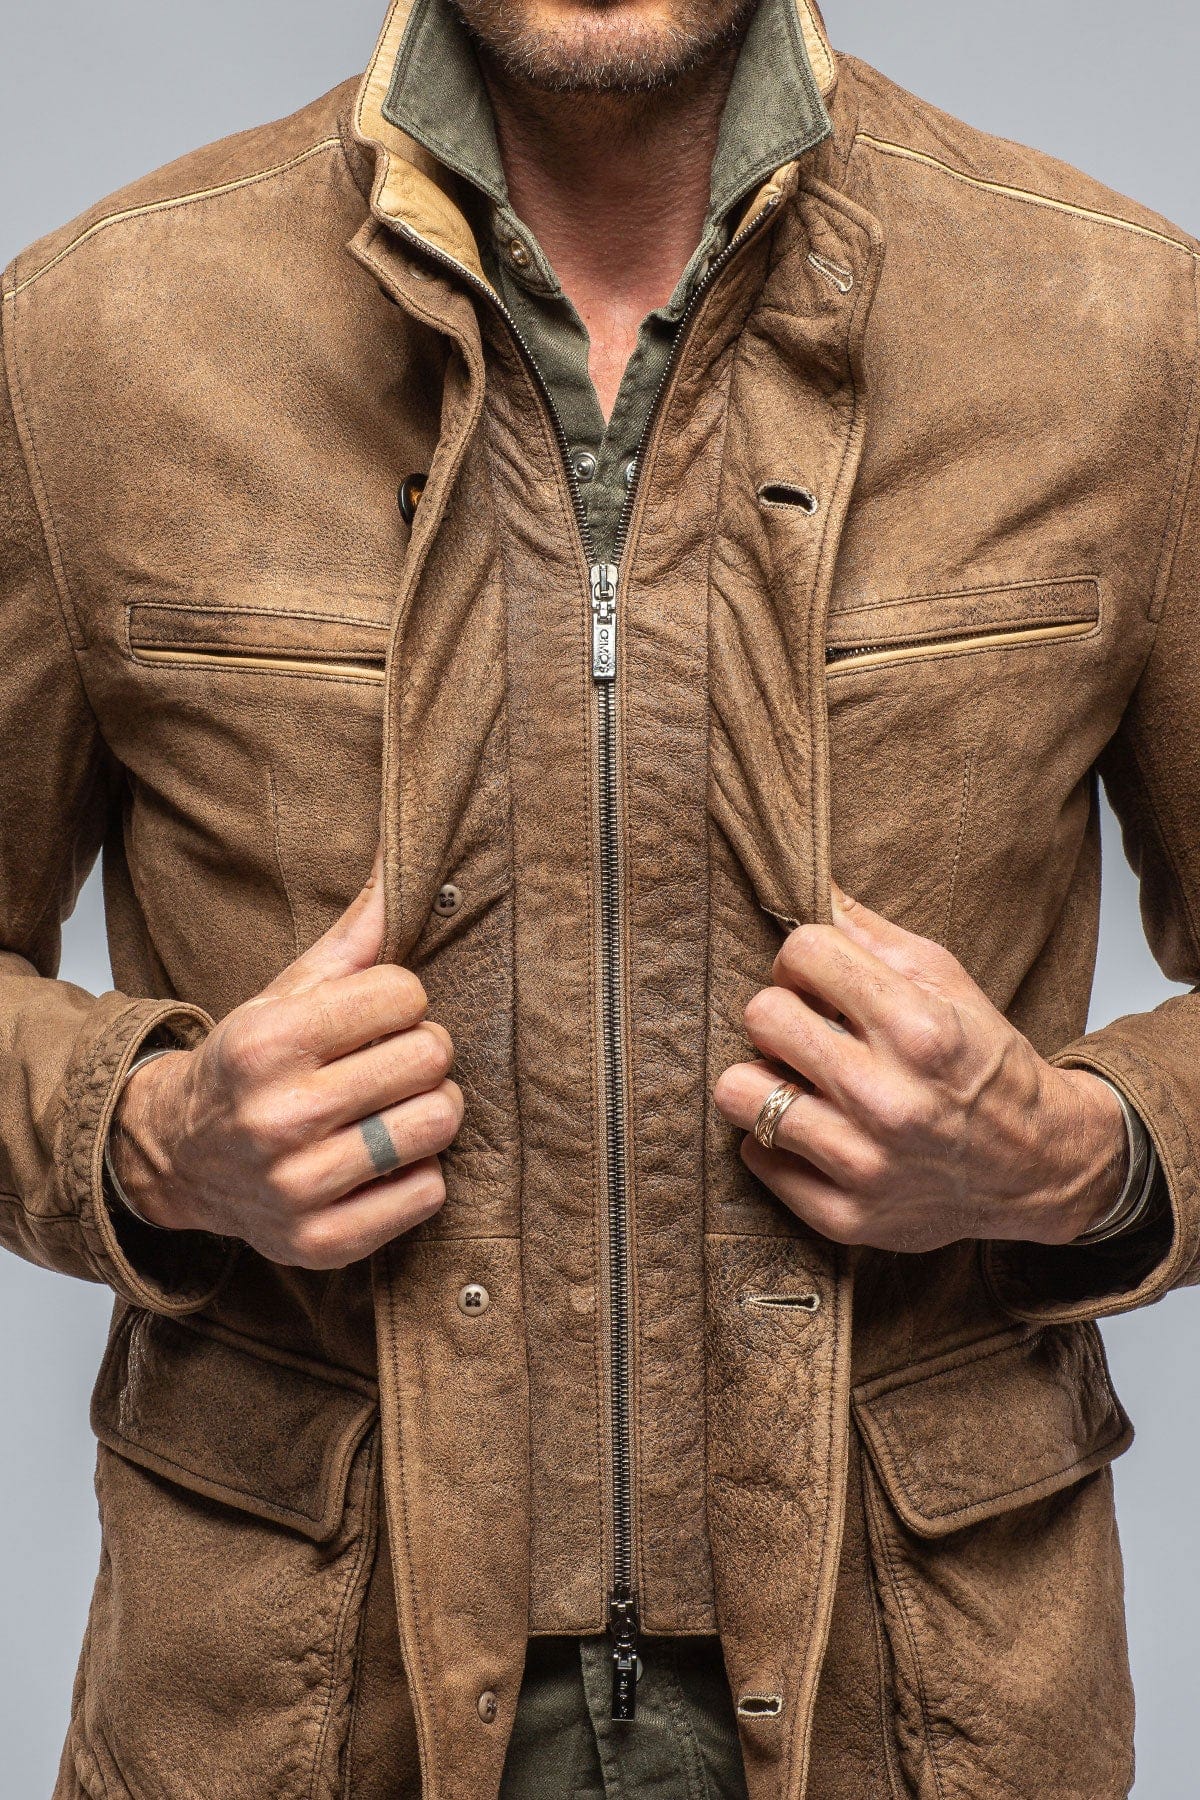 AW Jacket In Tan - AXEL'S